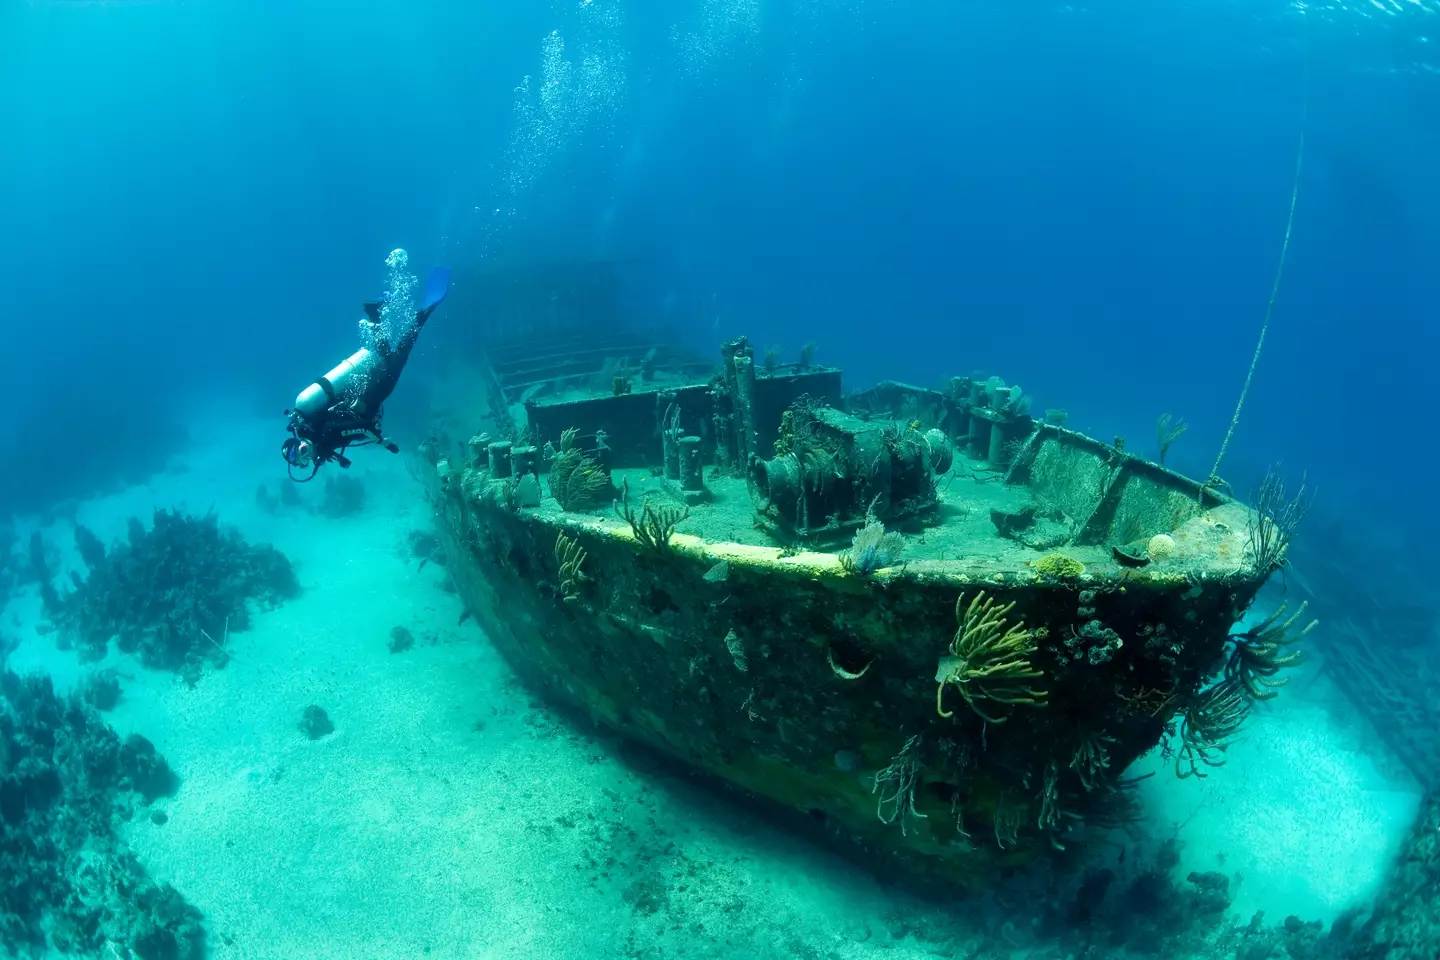 Shipwrecks can look very different to what we might imagine.